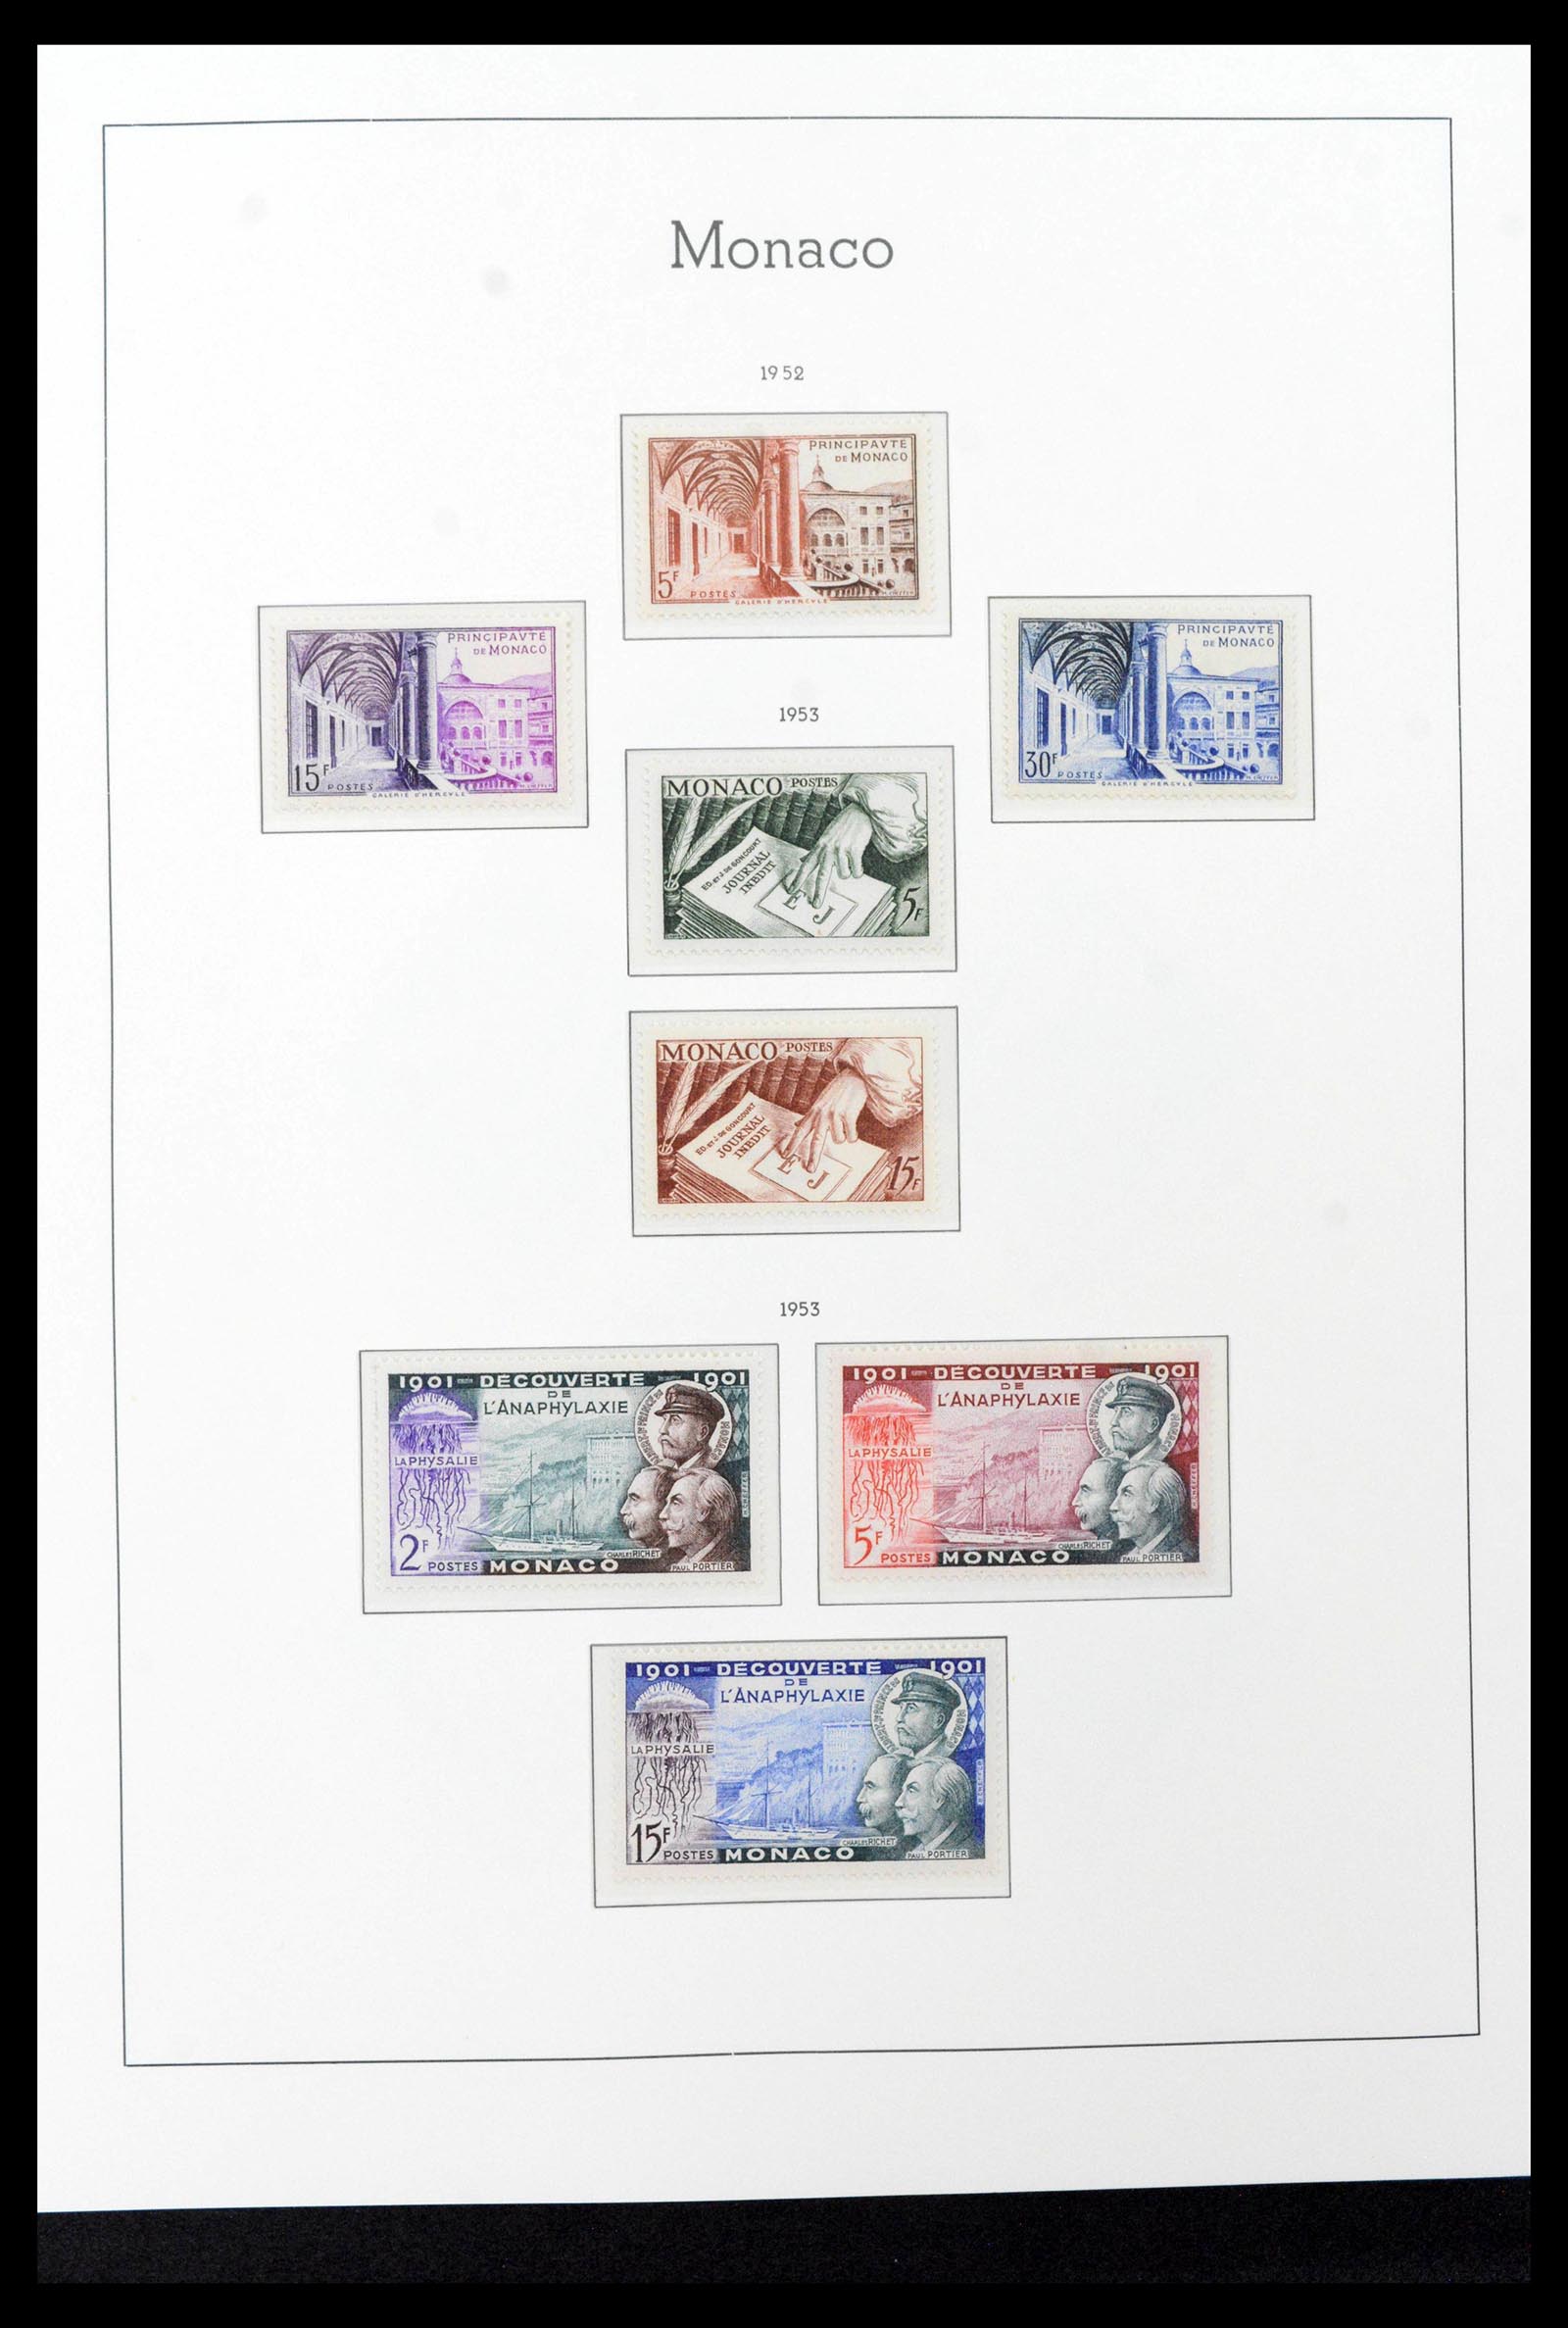 39390 0047 - Stamp collection 39390 Monaco complete 1885-1990.